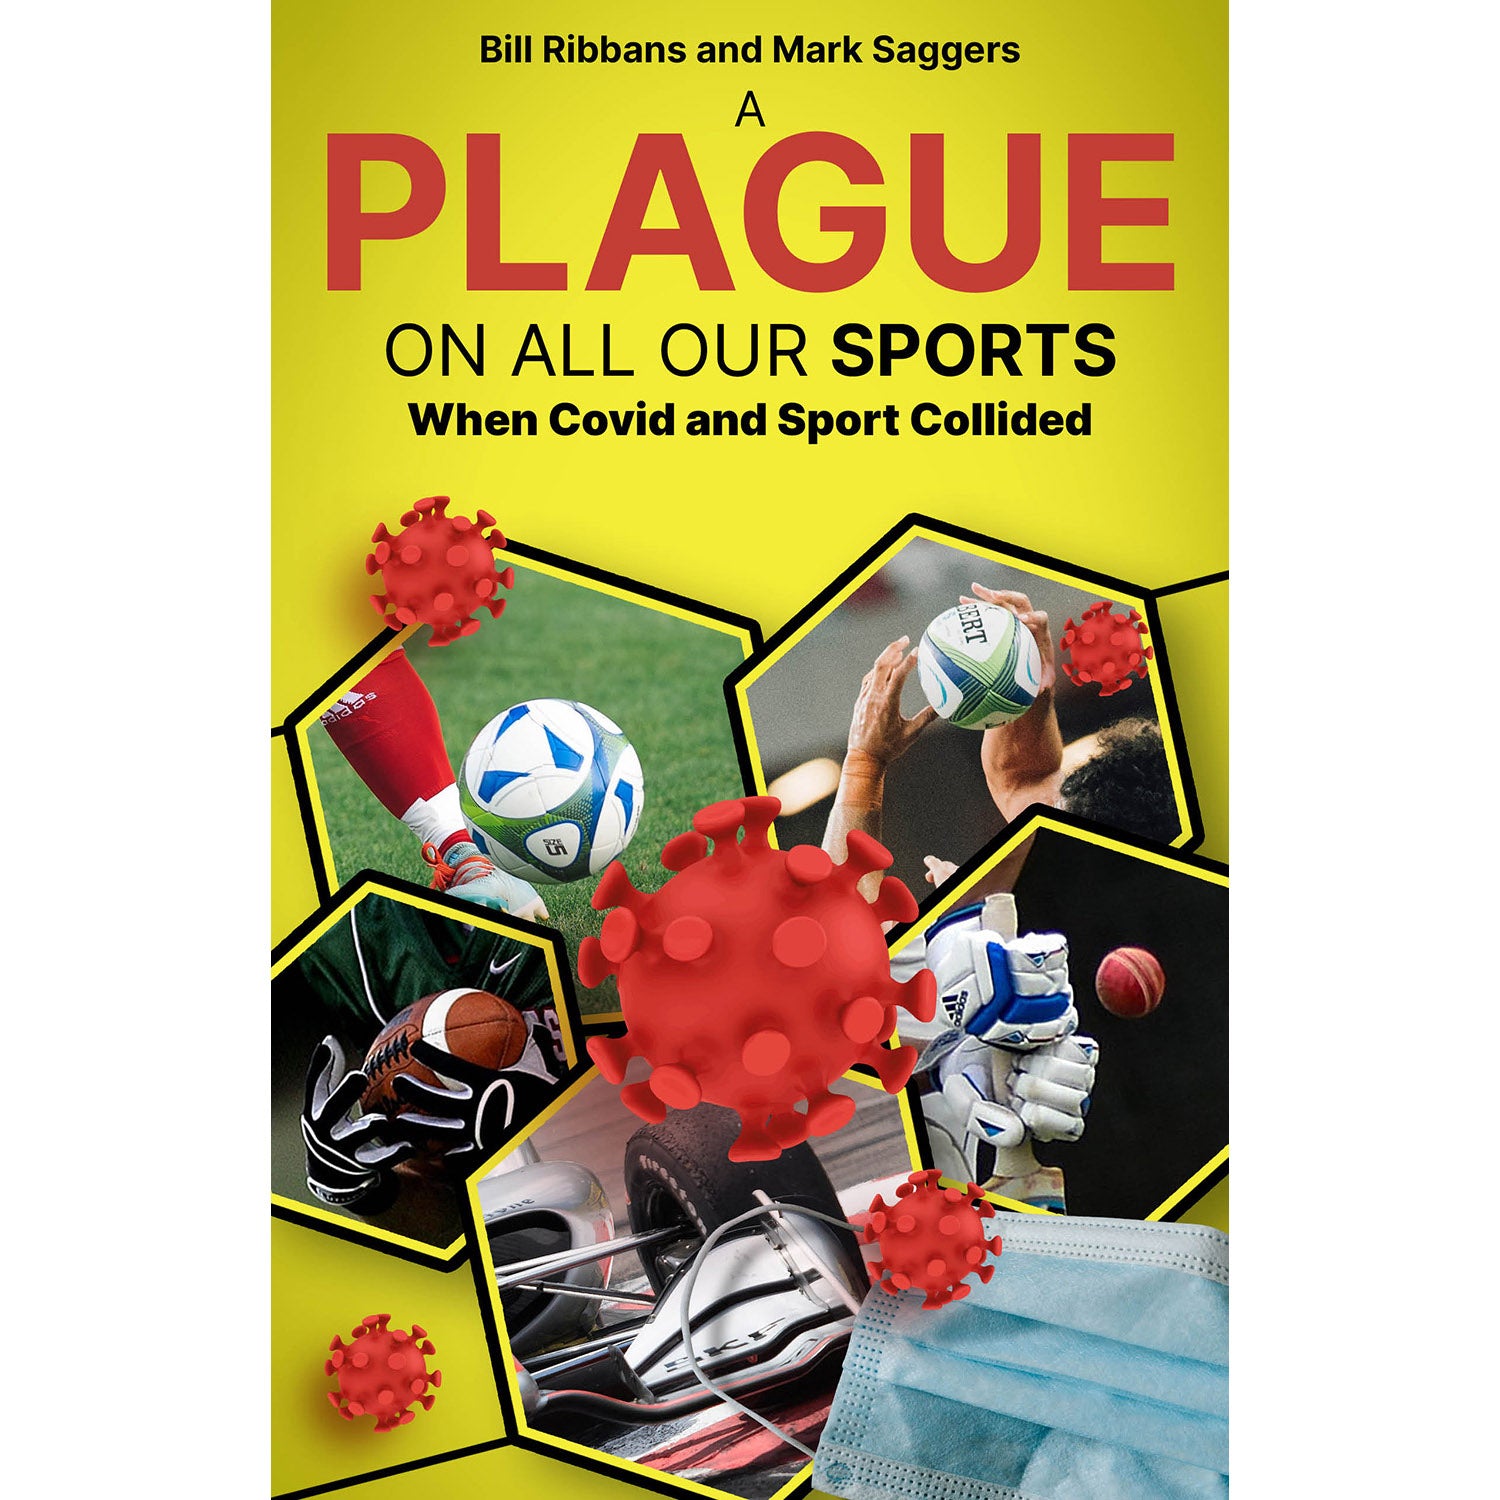 A Plague on All Our Sports – When Covid and Sport Collided